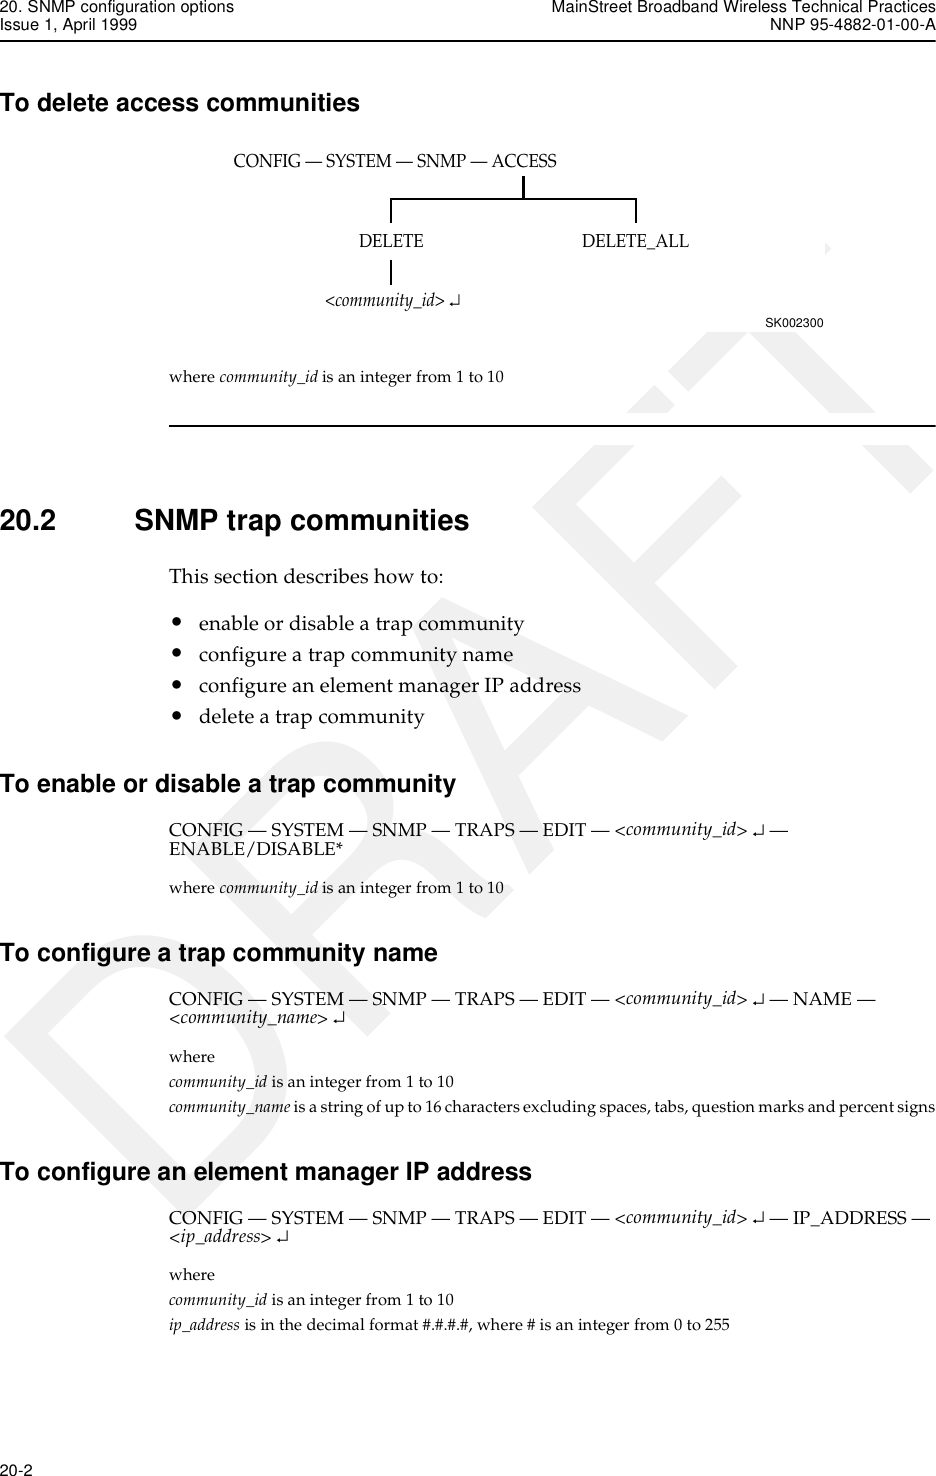 20. SNMP configuration options MainStreet Broadband Wireless Technical PracticesIssue 1, April 1999 NNP 95-4882-01-00-A20-2   DRAFTTo delete access communitieswhere community_id is an integer from 1 to 1020.2 SNMP trap communitiesThis section describes how to:•enable or disable a trap community•configure a trap community name•configure an element manager IP address•delete a trap communityTo enable or disable a trap communityCONFIG — SYSTEM — SNMP — TRAPS — EDIT — &lt;community_id&gt; ↵ — ENABLE/DISABLE*where community_id is an integer from 1 to 10To configure a trap community nameCONFIG — SYSTEM — SNMP — TRAPS — EDIT — &lt;community_id&gt; ↵ — NAME — &lt;community_name&gt; ↵wherecommunity_id is an integer from 1 to 10community_name is a string of up to 16 characters excluding spaces, tabs, question marks and percent signsTo configure an element manager IP addressCONFIG — SYSTEM — SNMP — TRAPS — EDIT — &lt;community_id&gt; ↵ — IP_ADDRESS — &lt;ip_address&gt; ↵wherecommunity_id is an integer from 1 to 10ip_address is in the decimal format #.#.#.#, where # is an integer from 0 to 255CONFIG — SYSTEM — SNMP — ACCESSSK002300DELETE_ALLDELETE&lt;community_id&gt; ↵